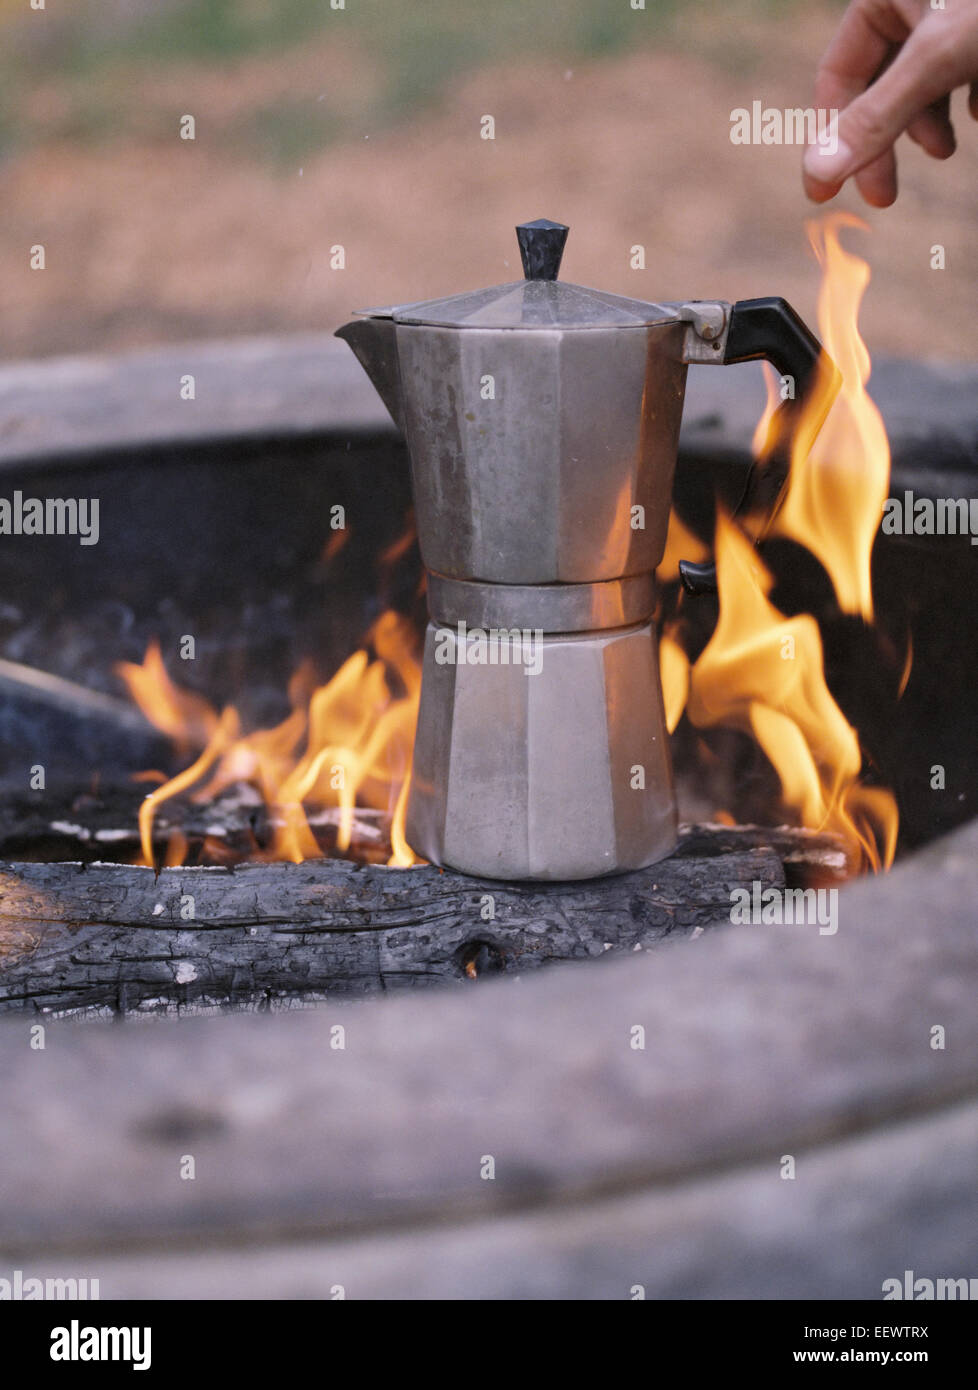 Espresso maker standing over an outdoor fire. Stock Photo